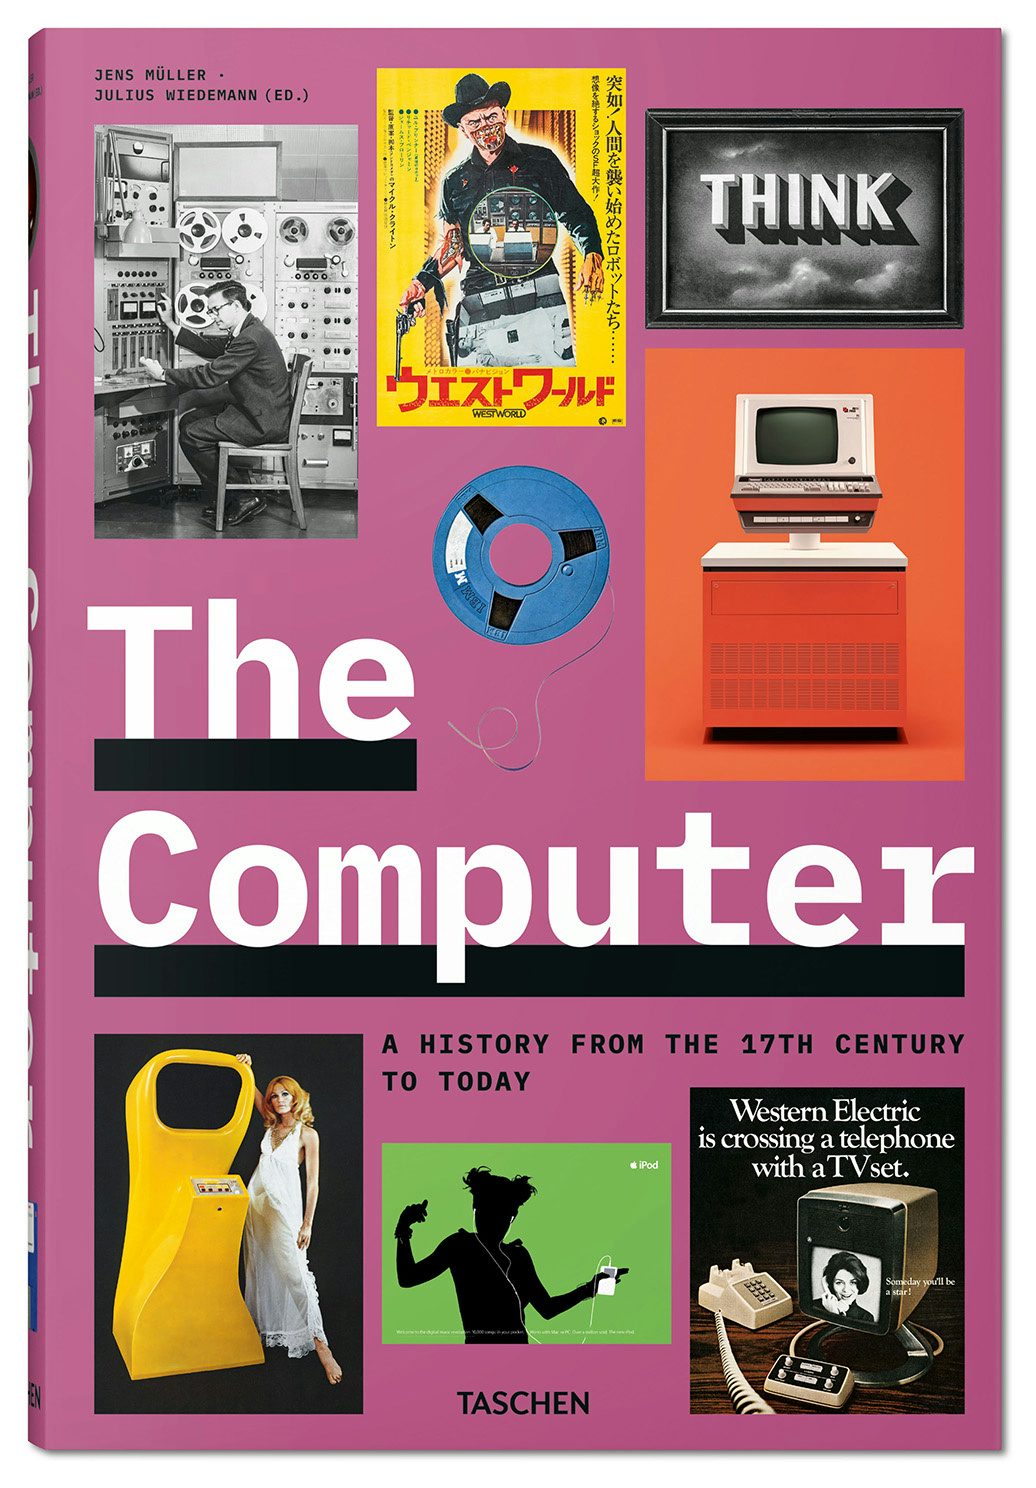 Image of the pink book cover of The Computer, featuring the book name in white monospace font and images of an iPod advert, a Westworld poster, an image that reads 'Think', and several images of old computers